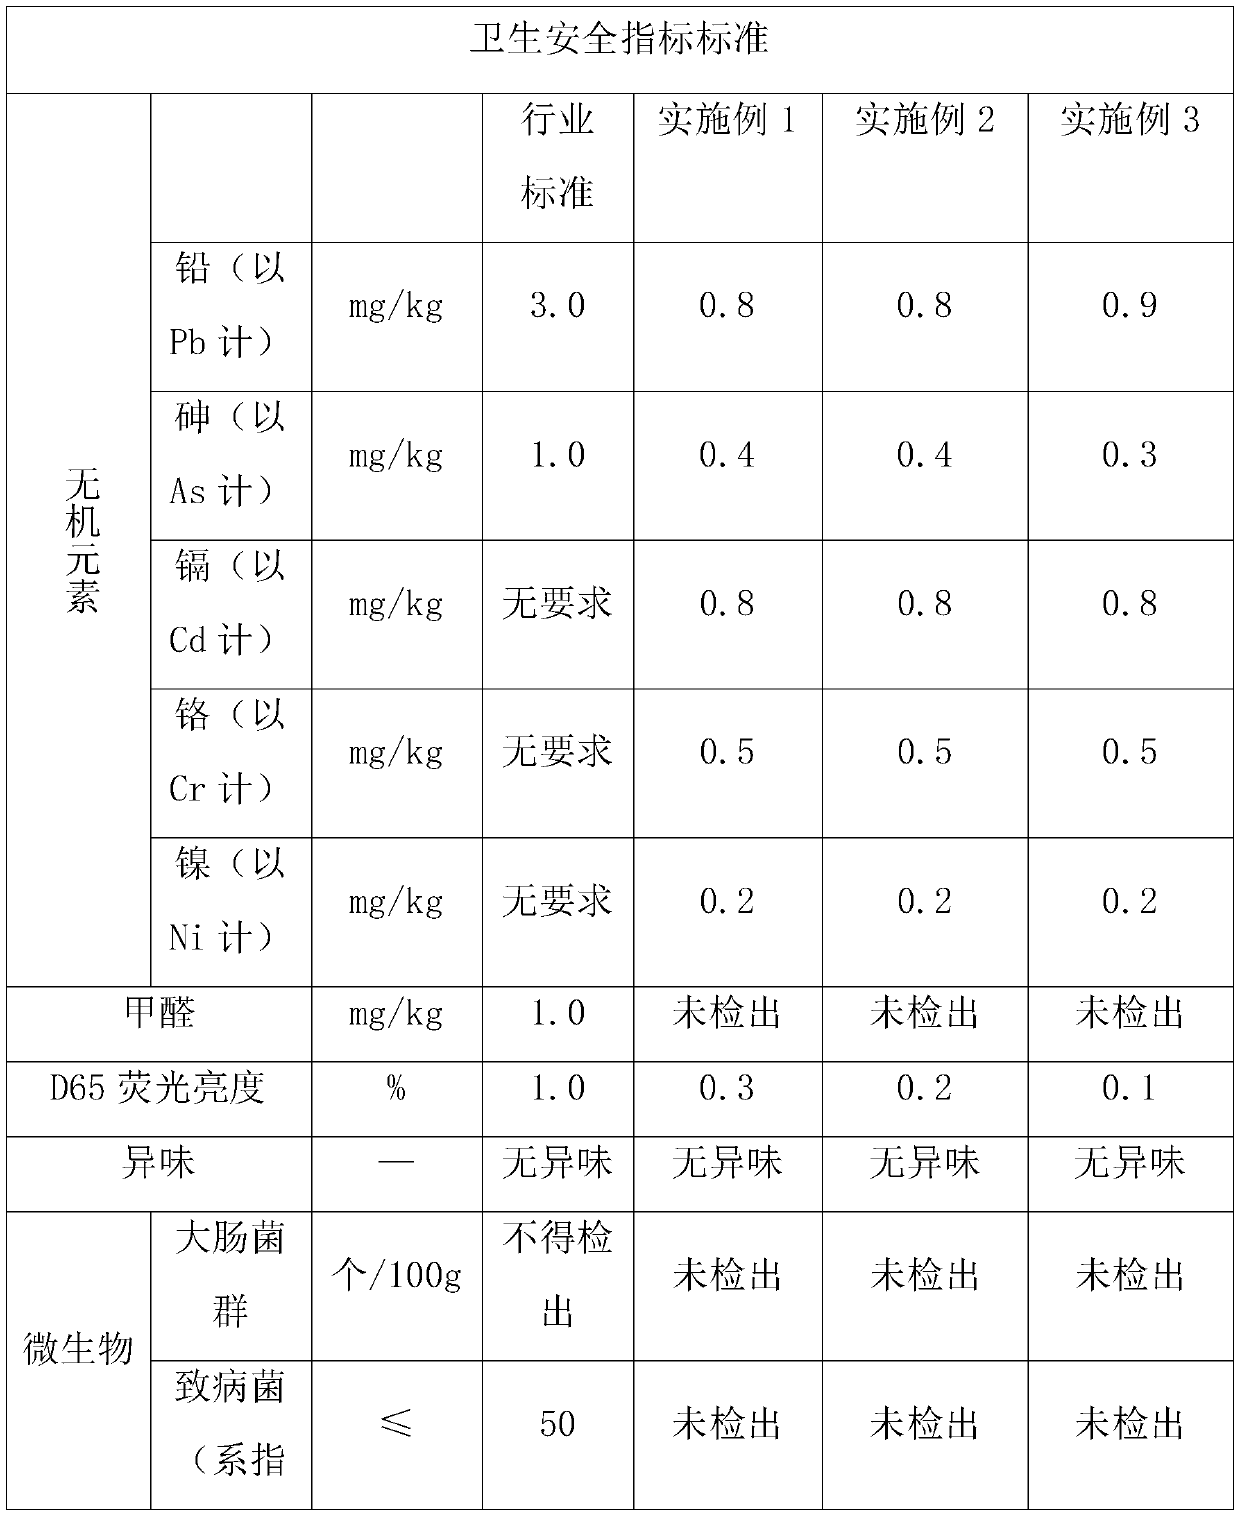 Functional lining body paper for cigarettes and preparation method of functional lining body paper